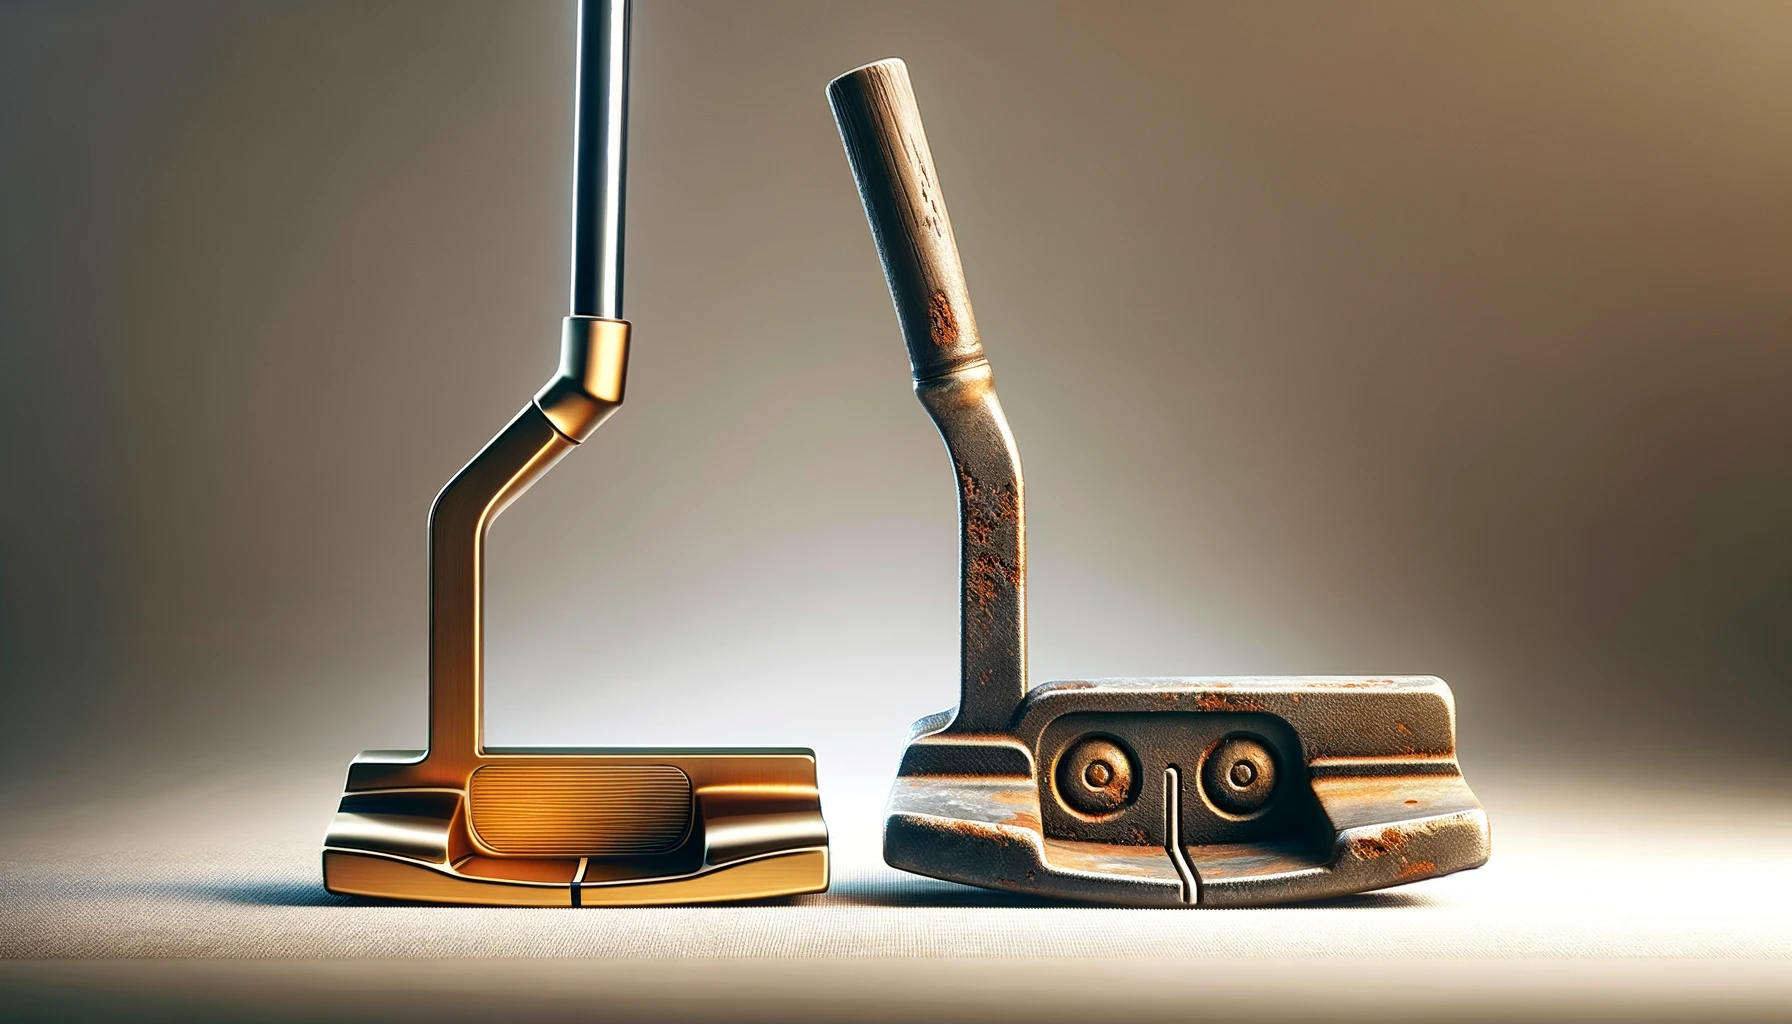 Is It Worth Buying a Good Putter? Complete Guide for Amateurs